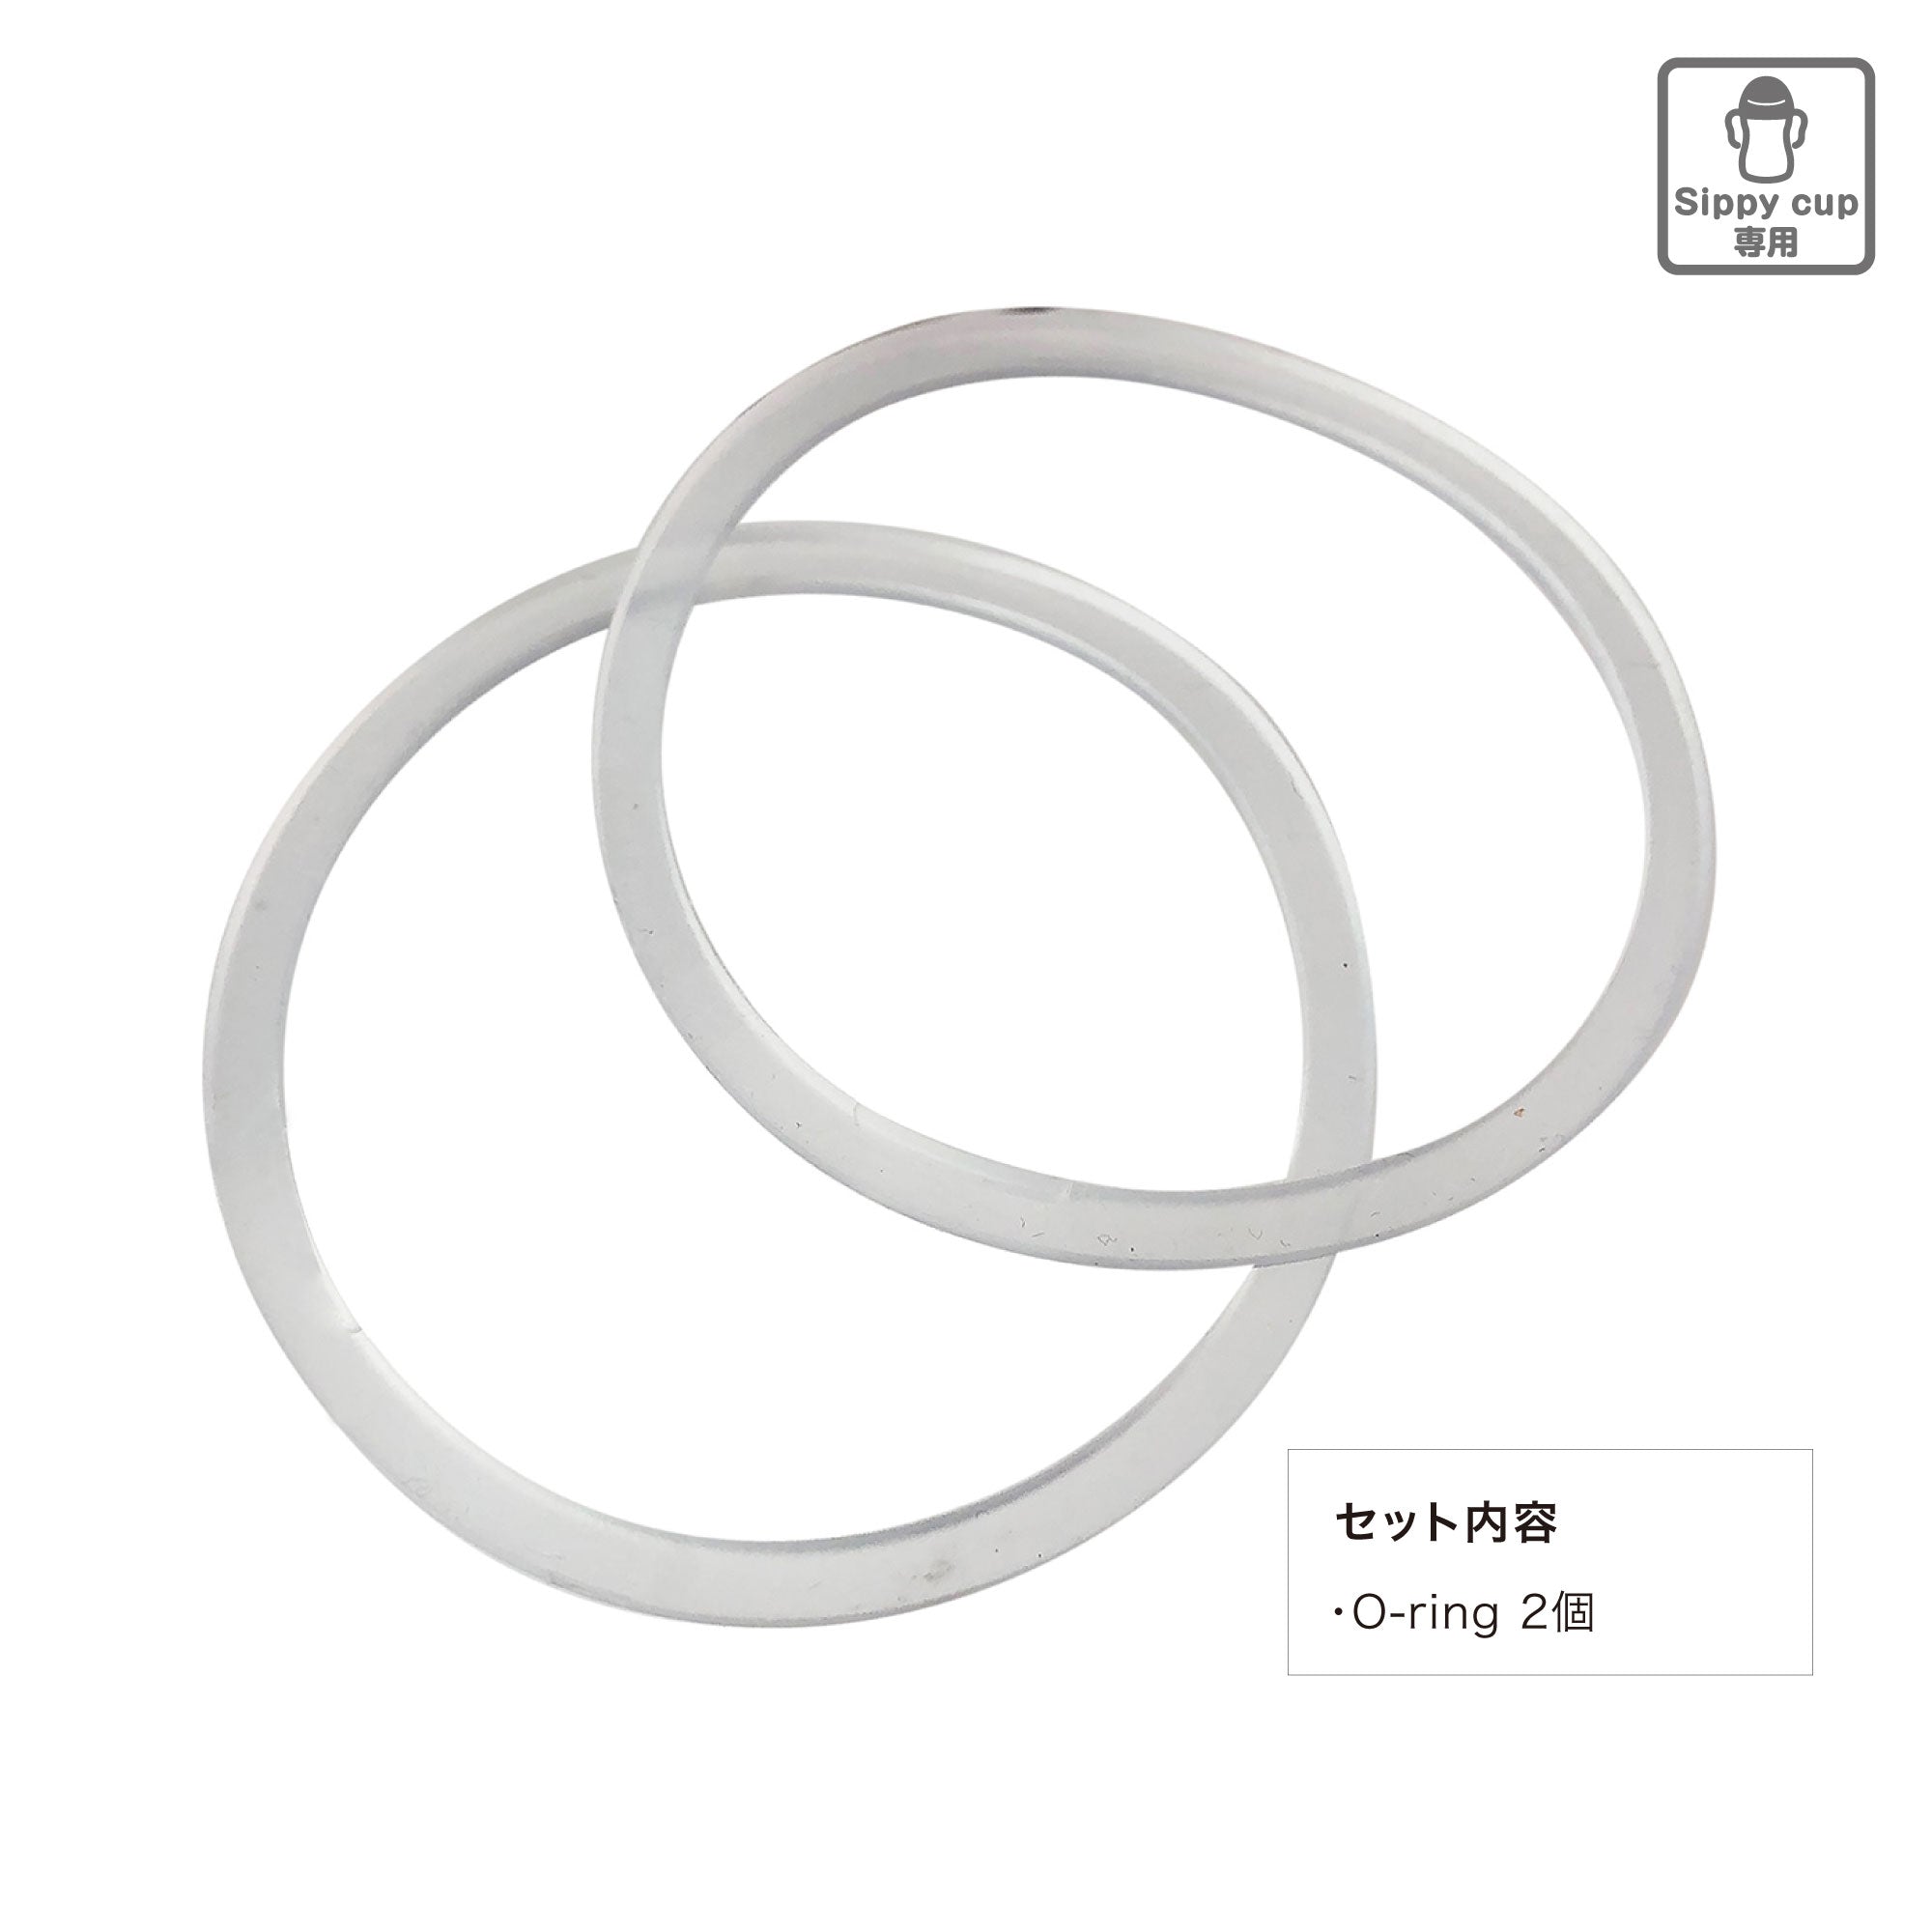 *b.box* Sippycup replacement 2pk o-rings シッピーカップ 専用スペアリング 2個セット